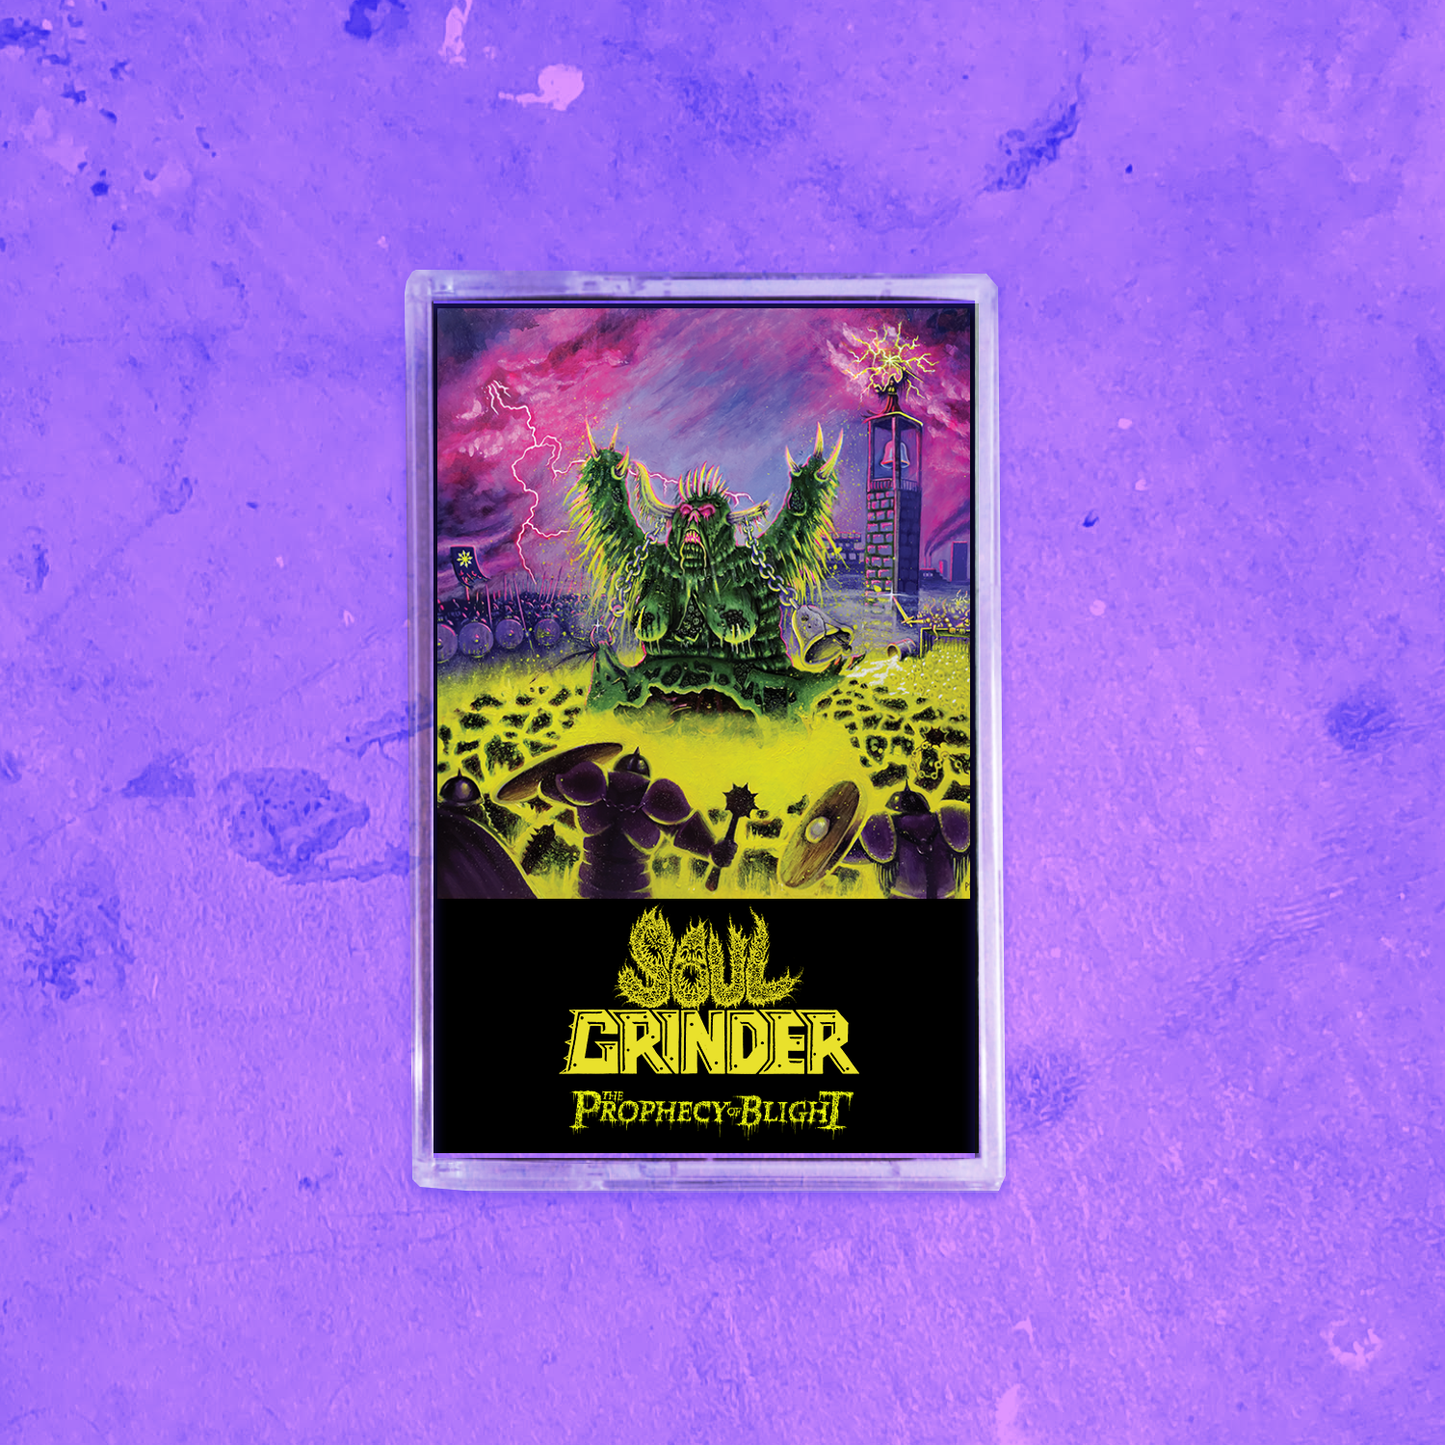 SOUL GRINDER THE PROPHECY OF BLIGHT CASSETTE TAPE